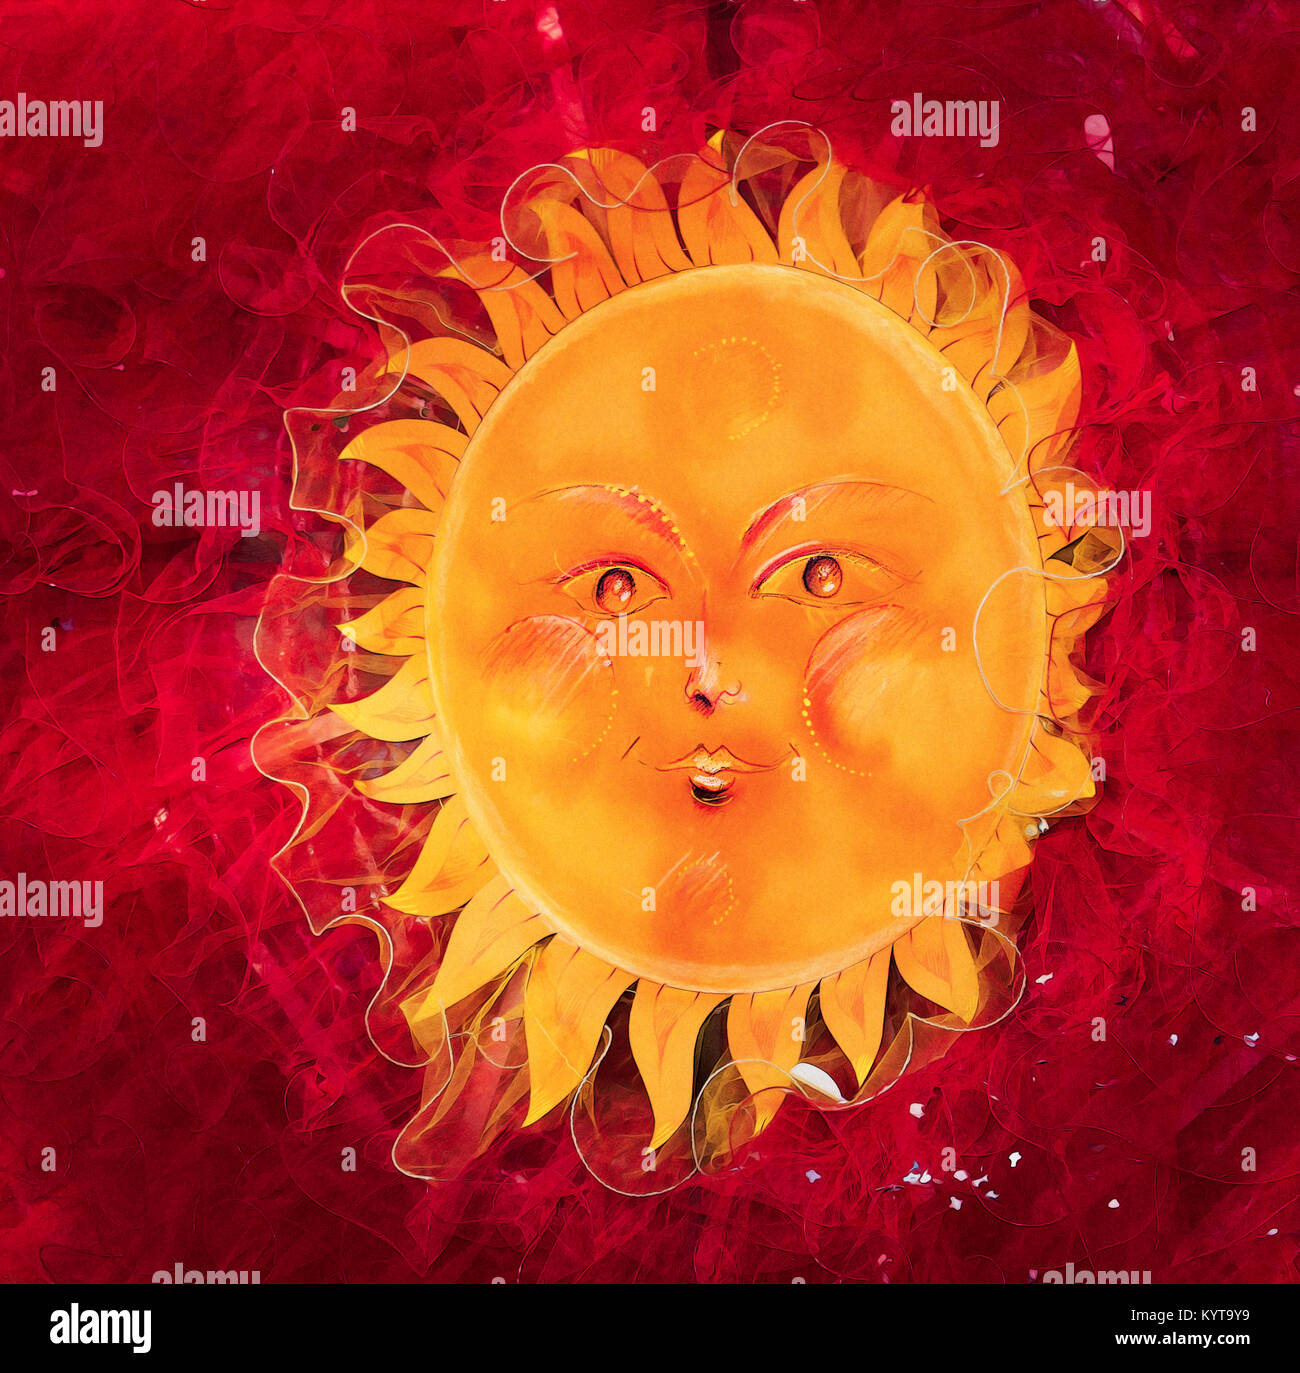 Digital illustration. A chubby sun painted on a red and veiled background. Stock Photo